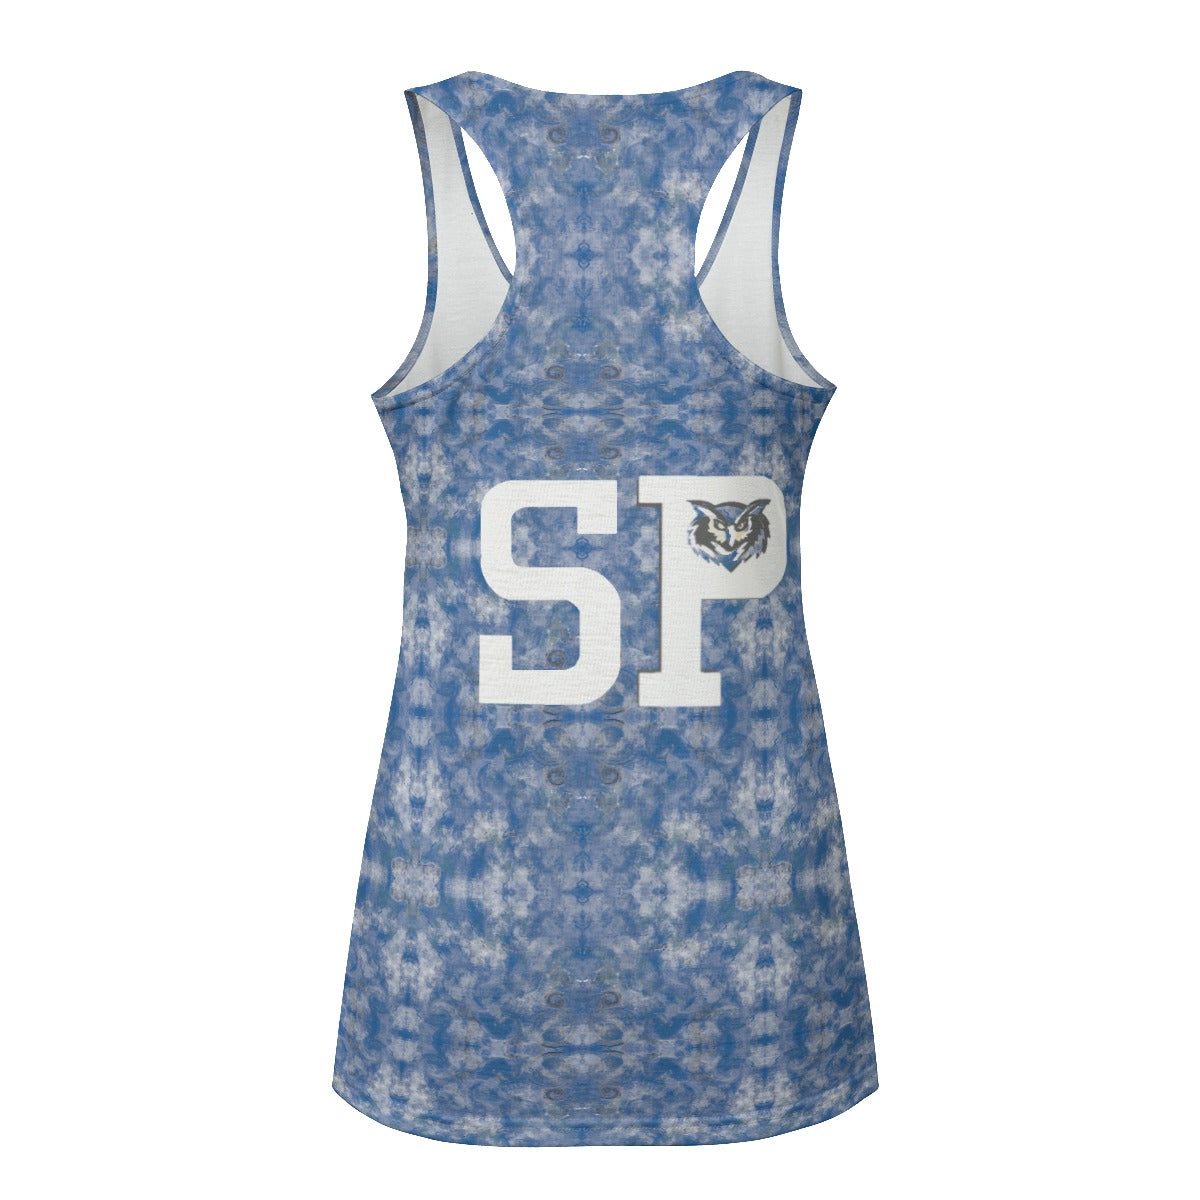 Eco-friendly All-Over Print Women's Tank Top